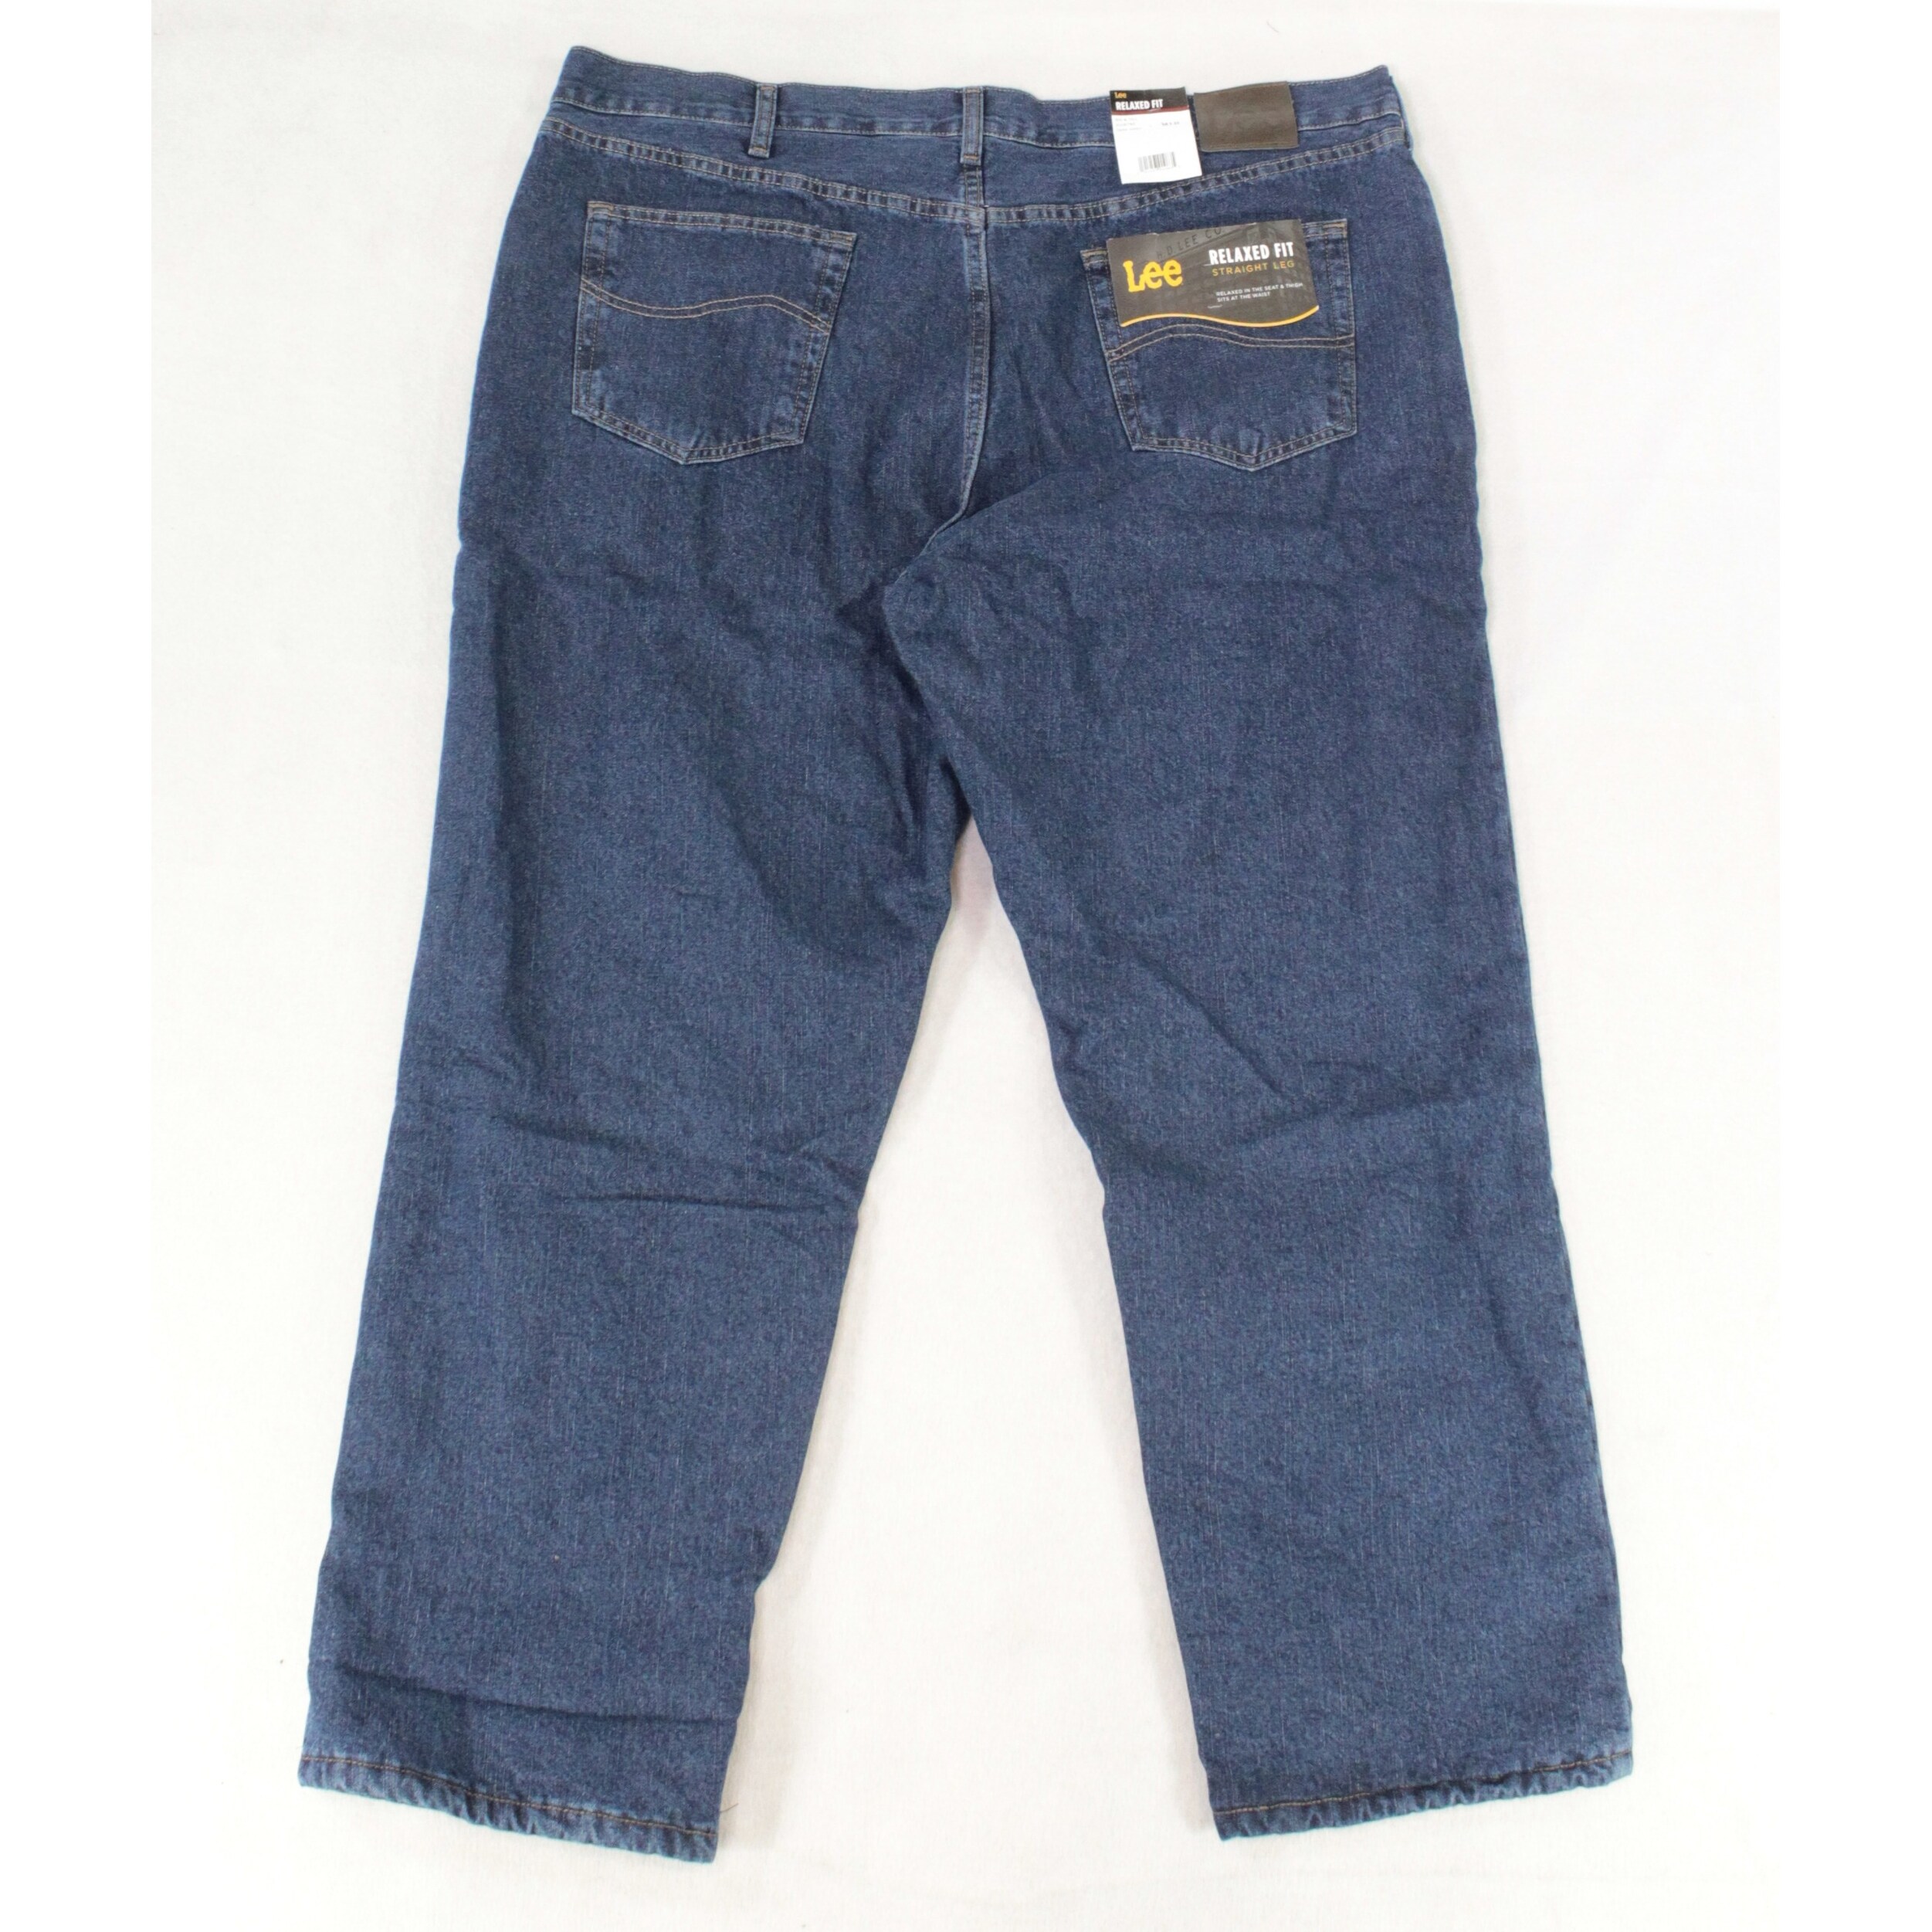 big and tall fleece lined jeans